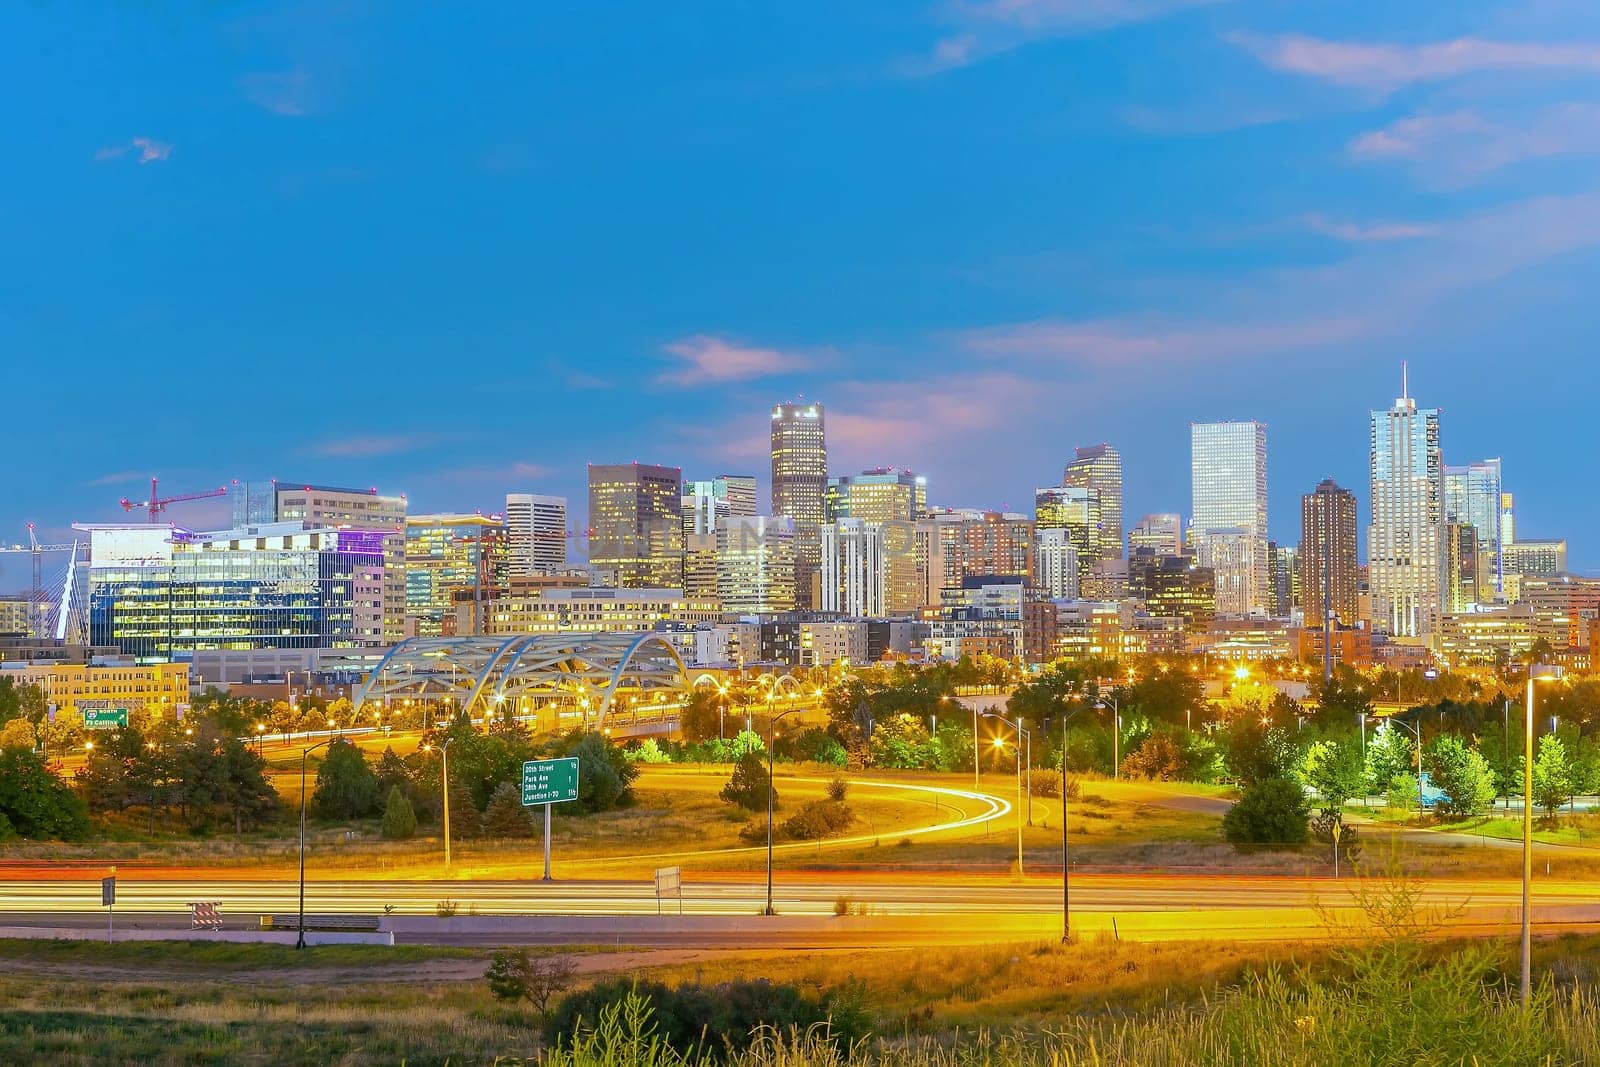 Denver downtown city skyline, cityscape of Colorado in USA  by f11photo